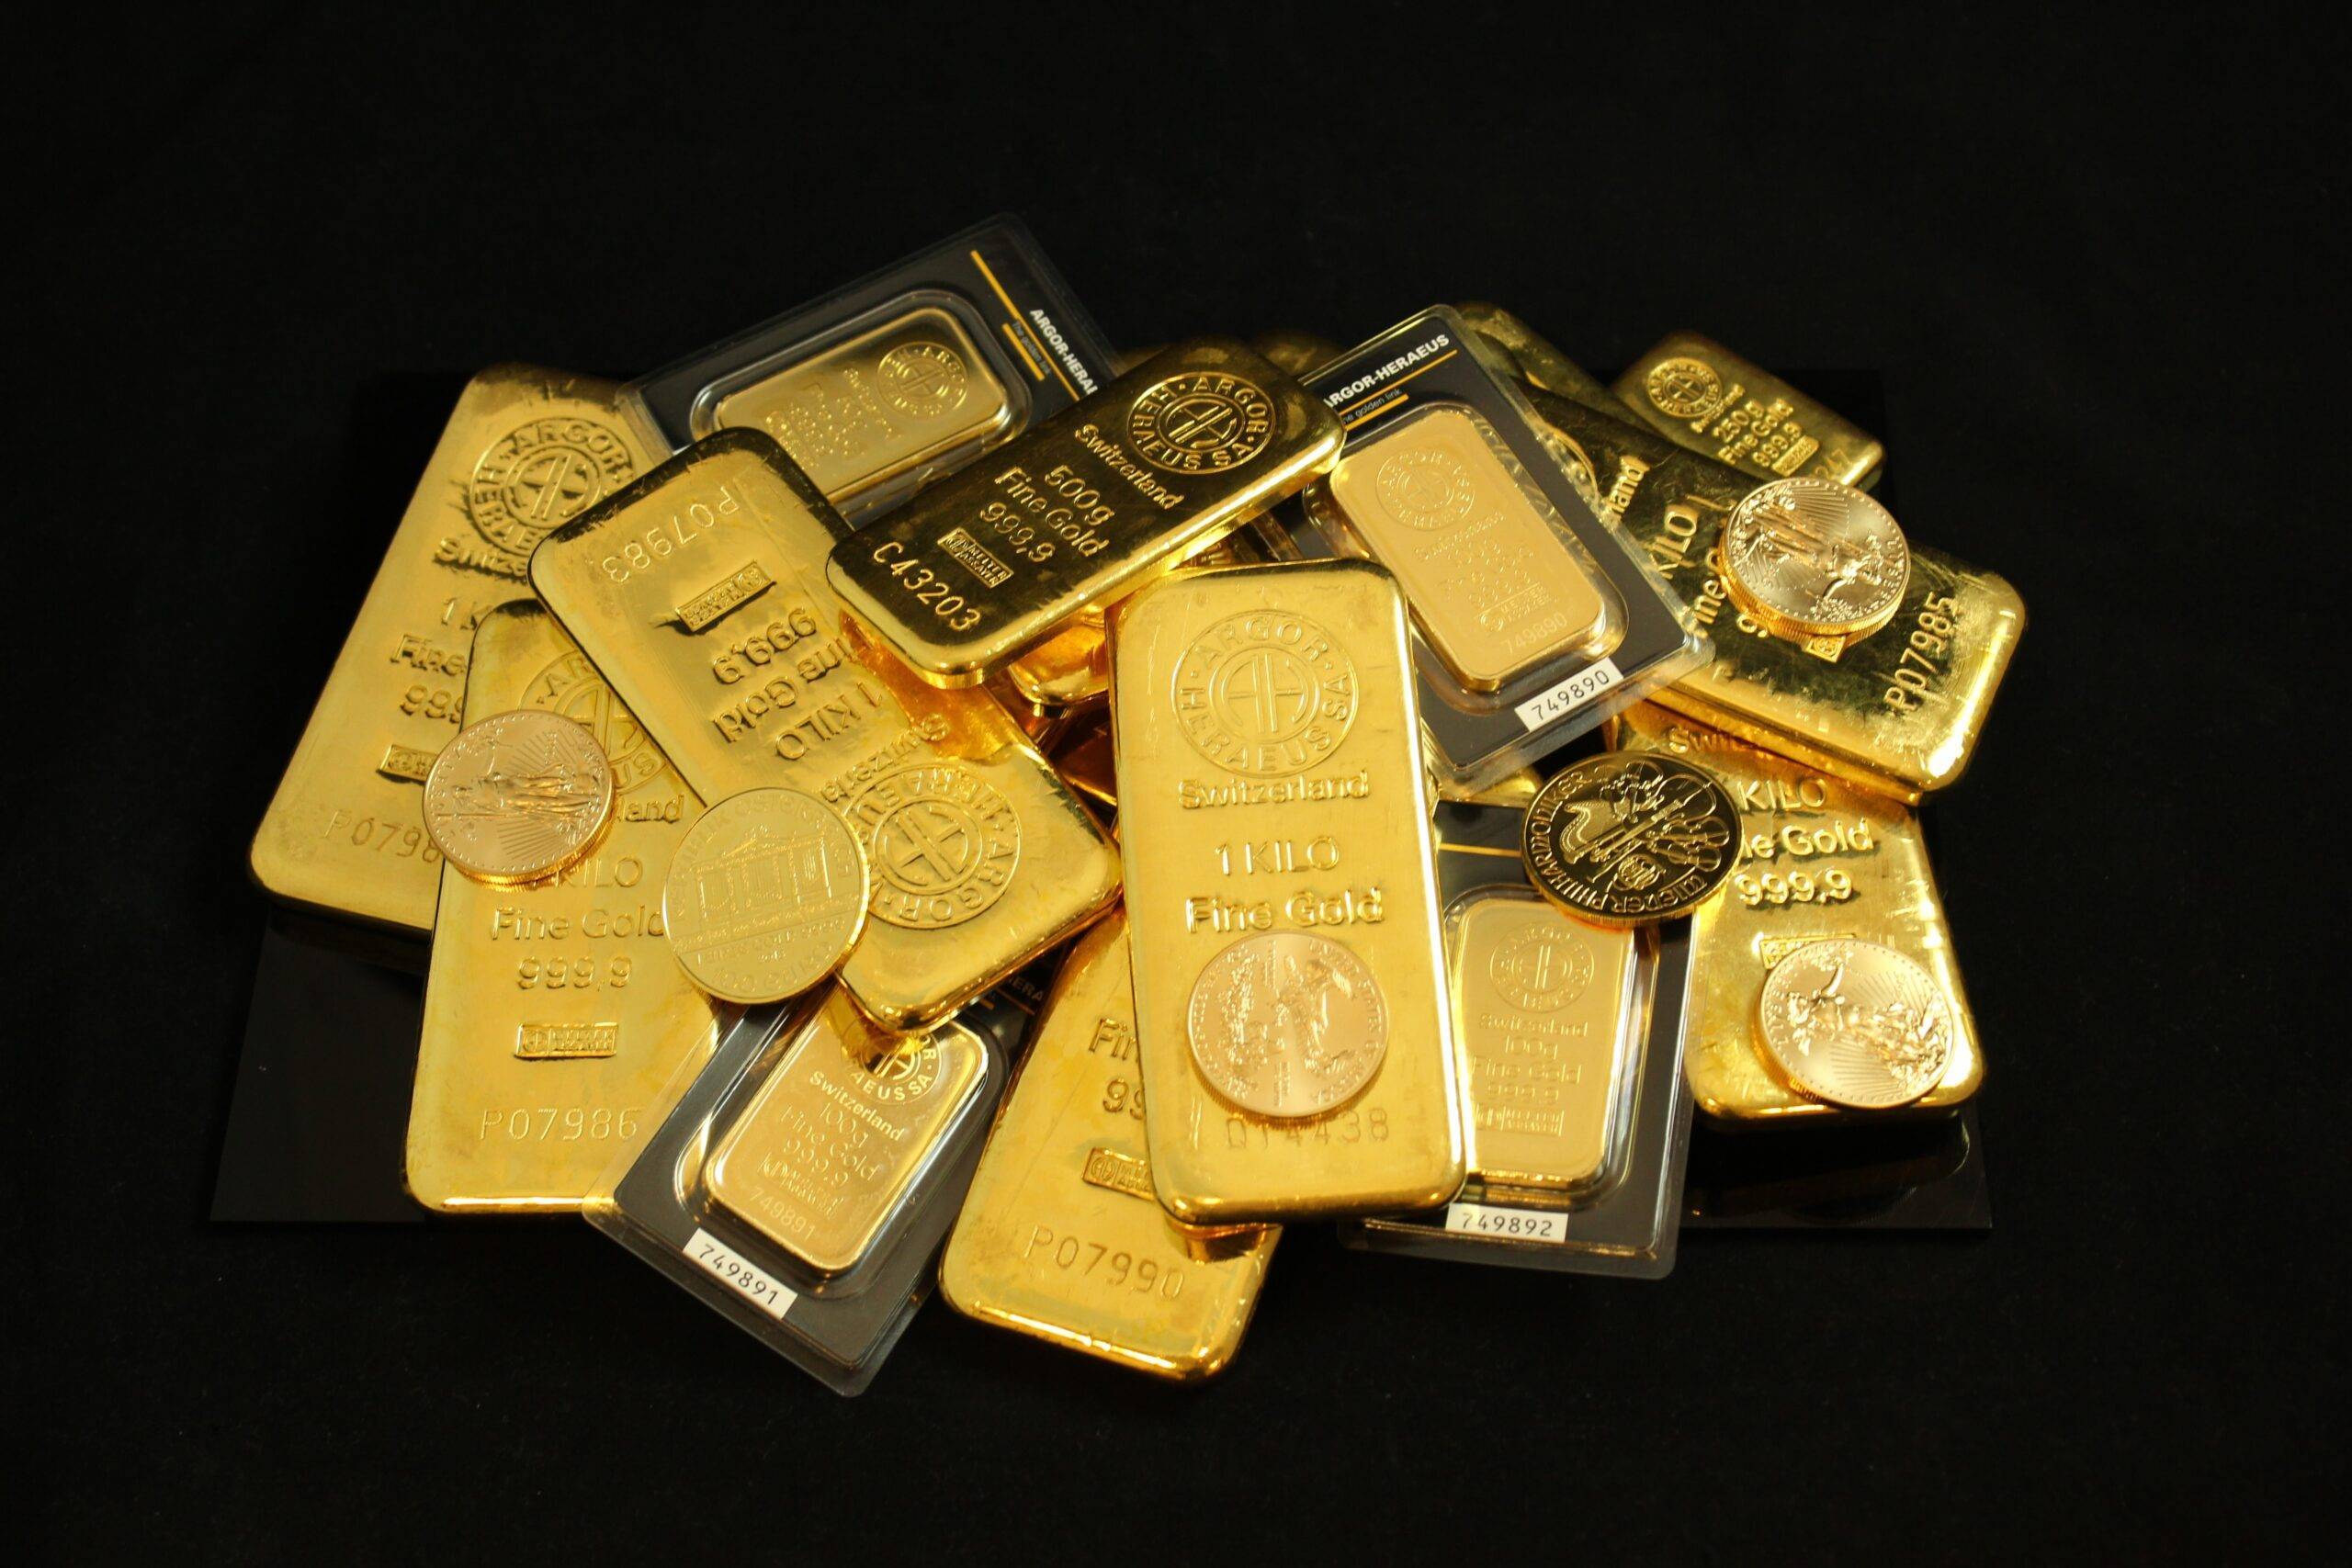 Study Shows Recovery from the Great Depression Linked to Abandoning Gold Standard